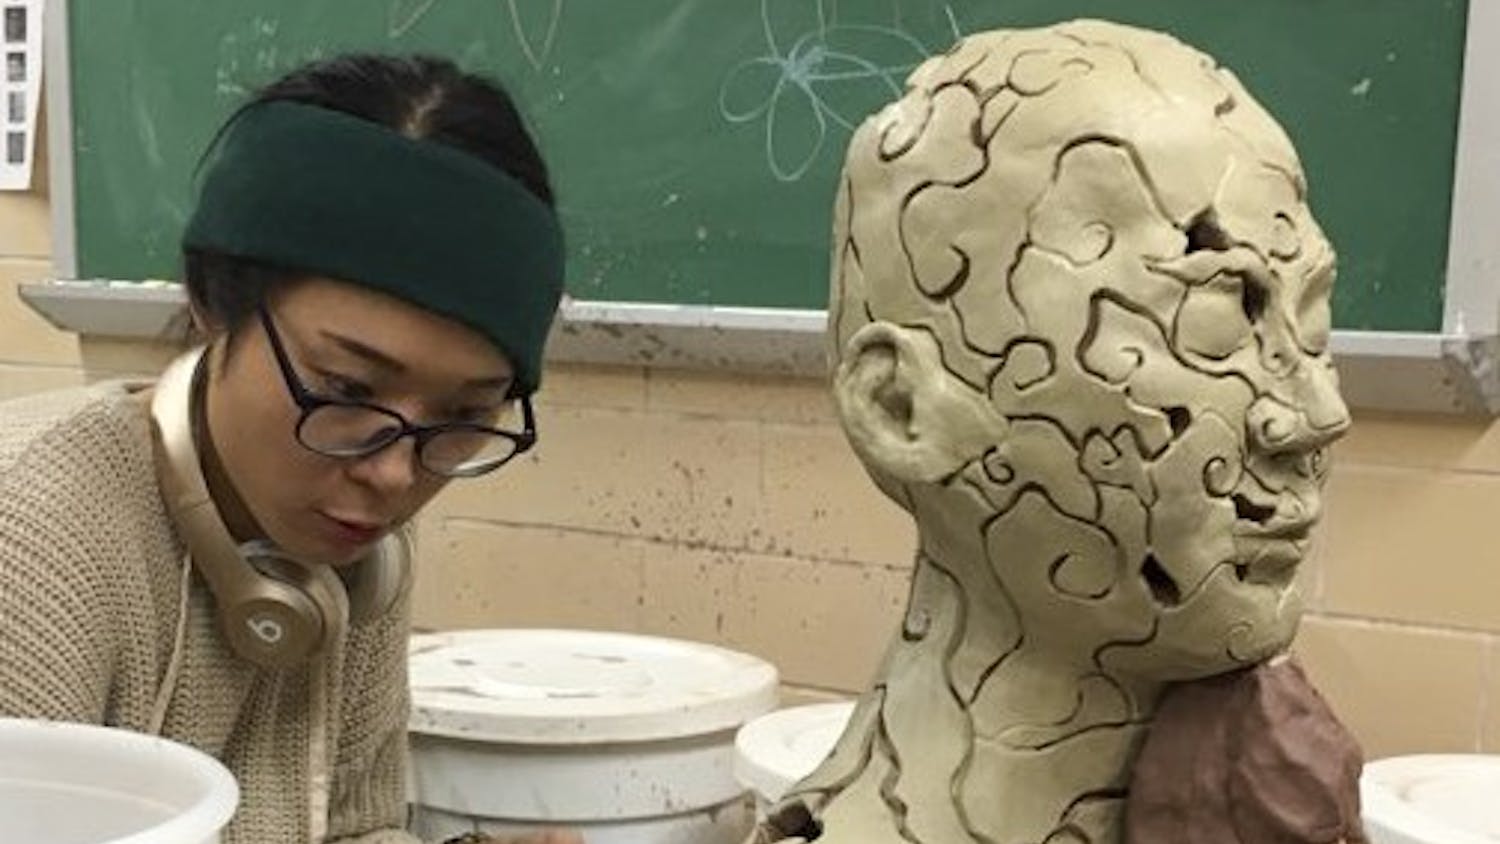 Won-Hee Parkby works on creating a ceramic bust. Parkby is BFA student at IU.